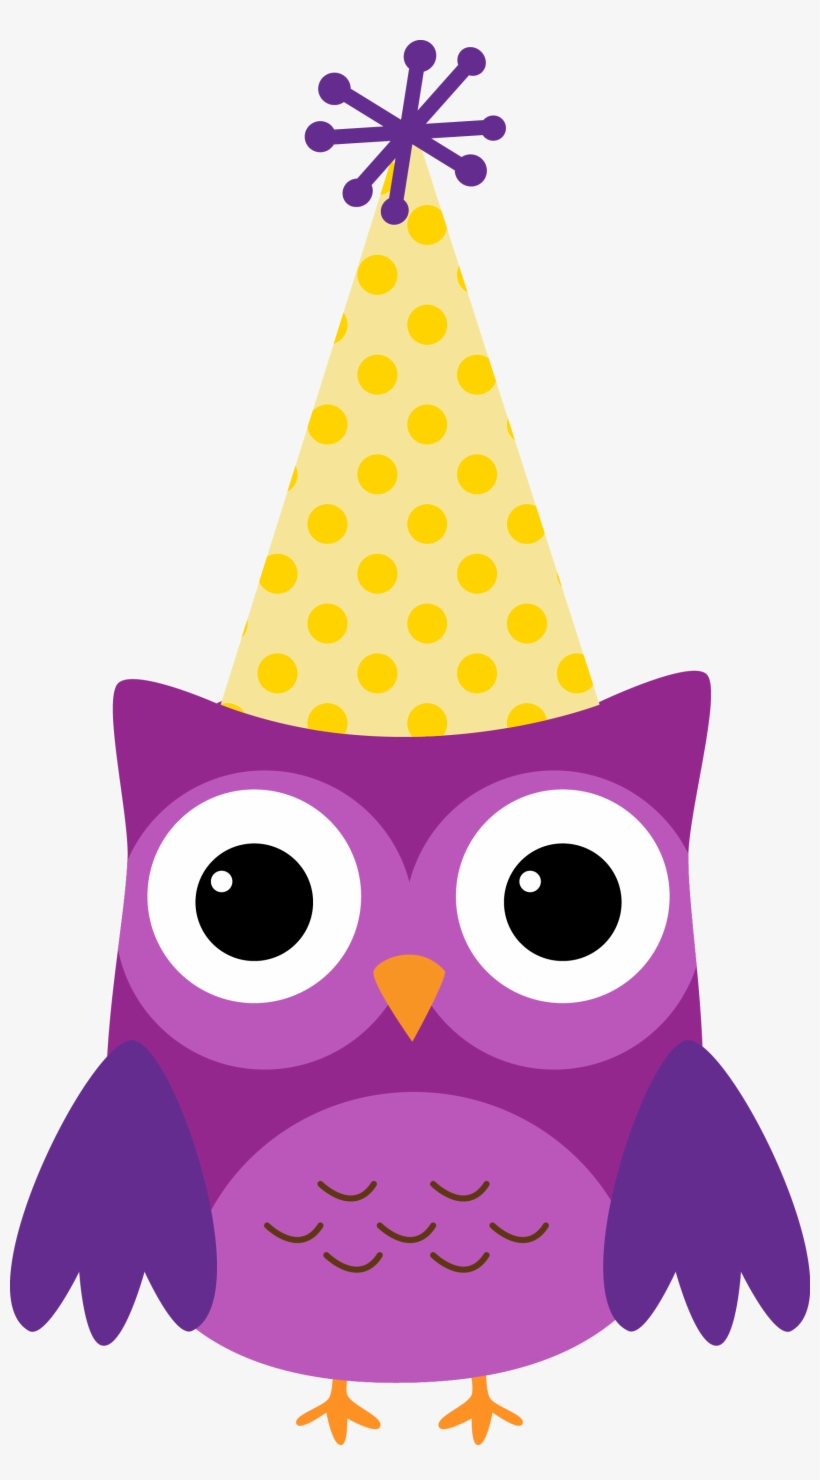 Party Clipart Owl - Owl Birthday Clip Art, transparent png #7901245